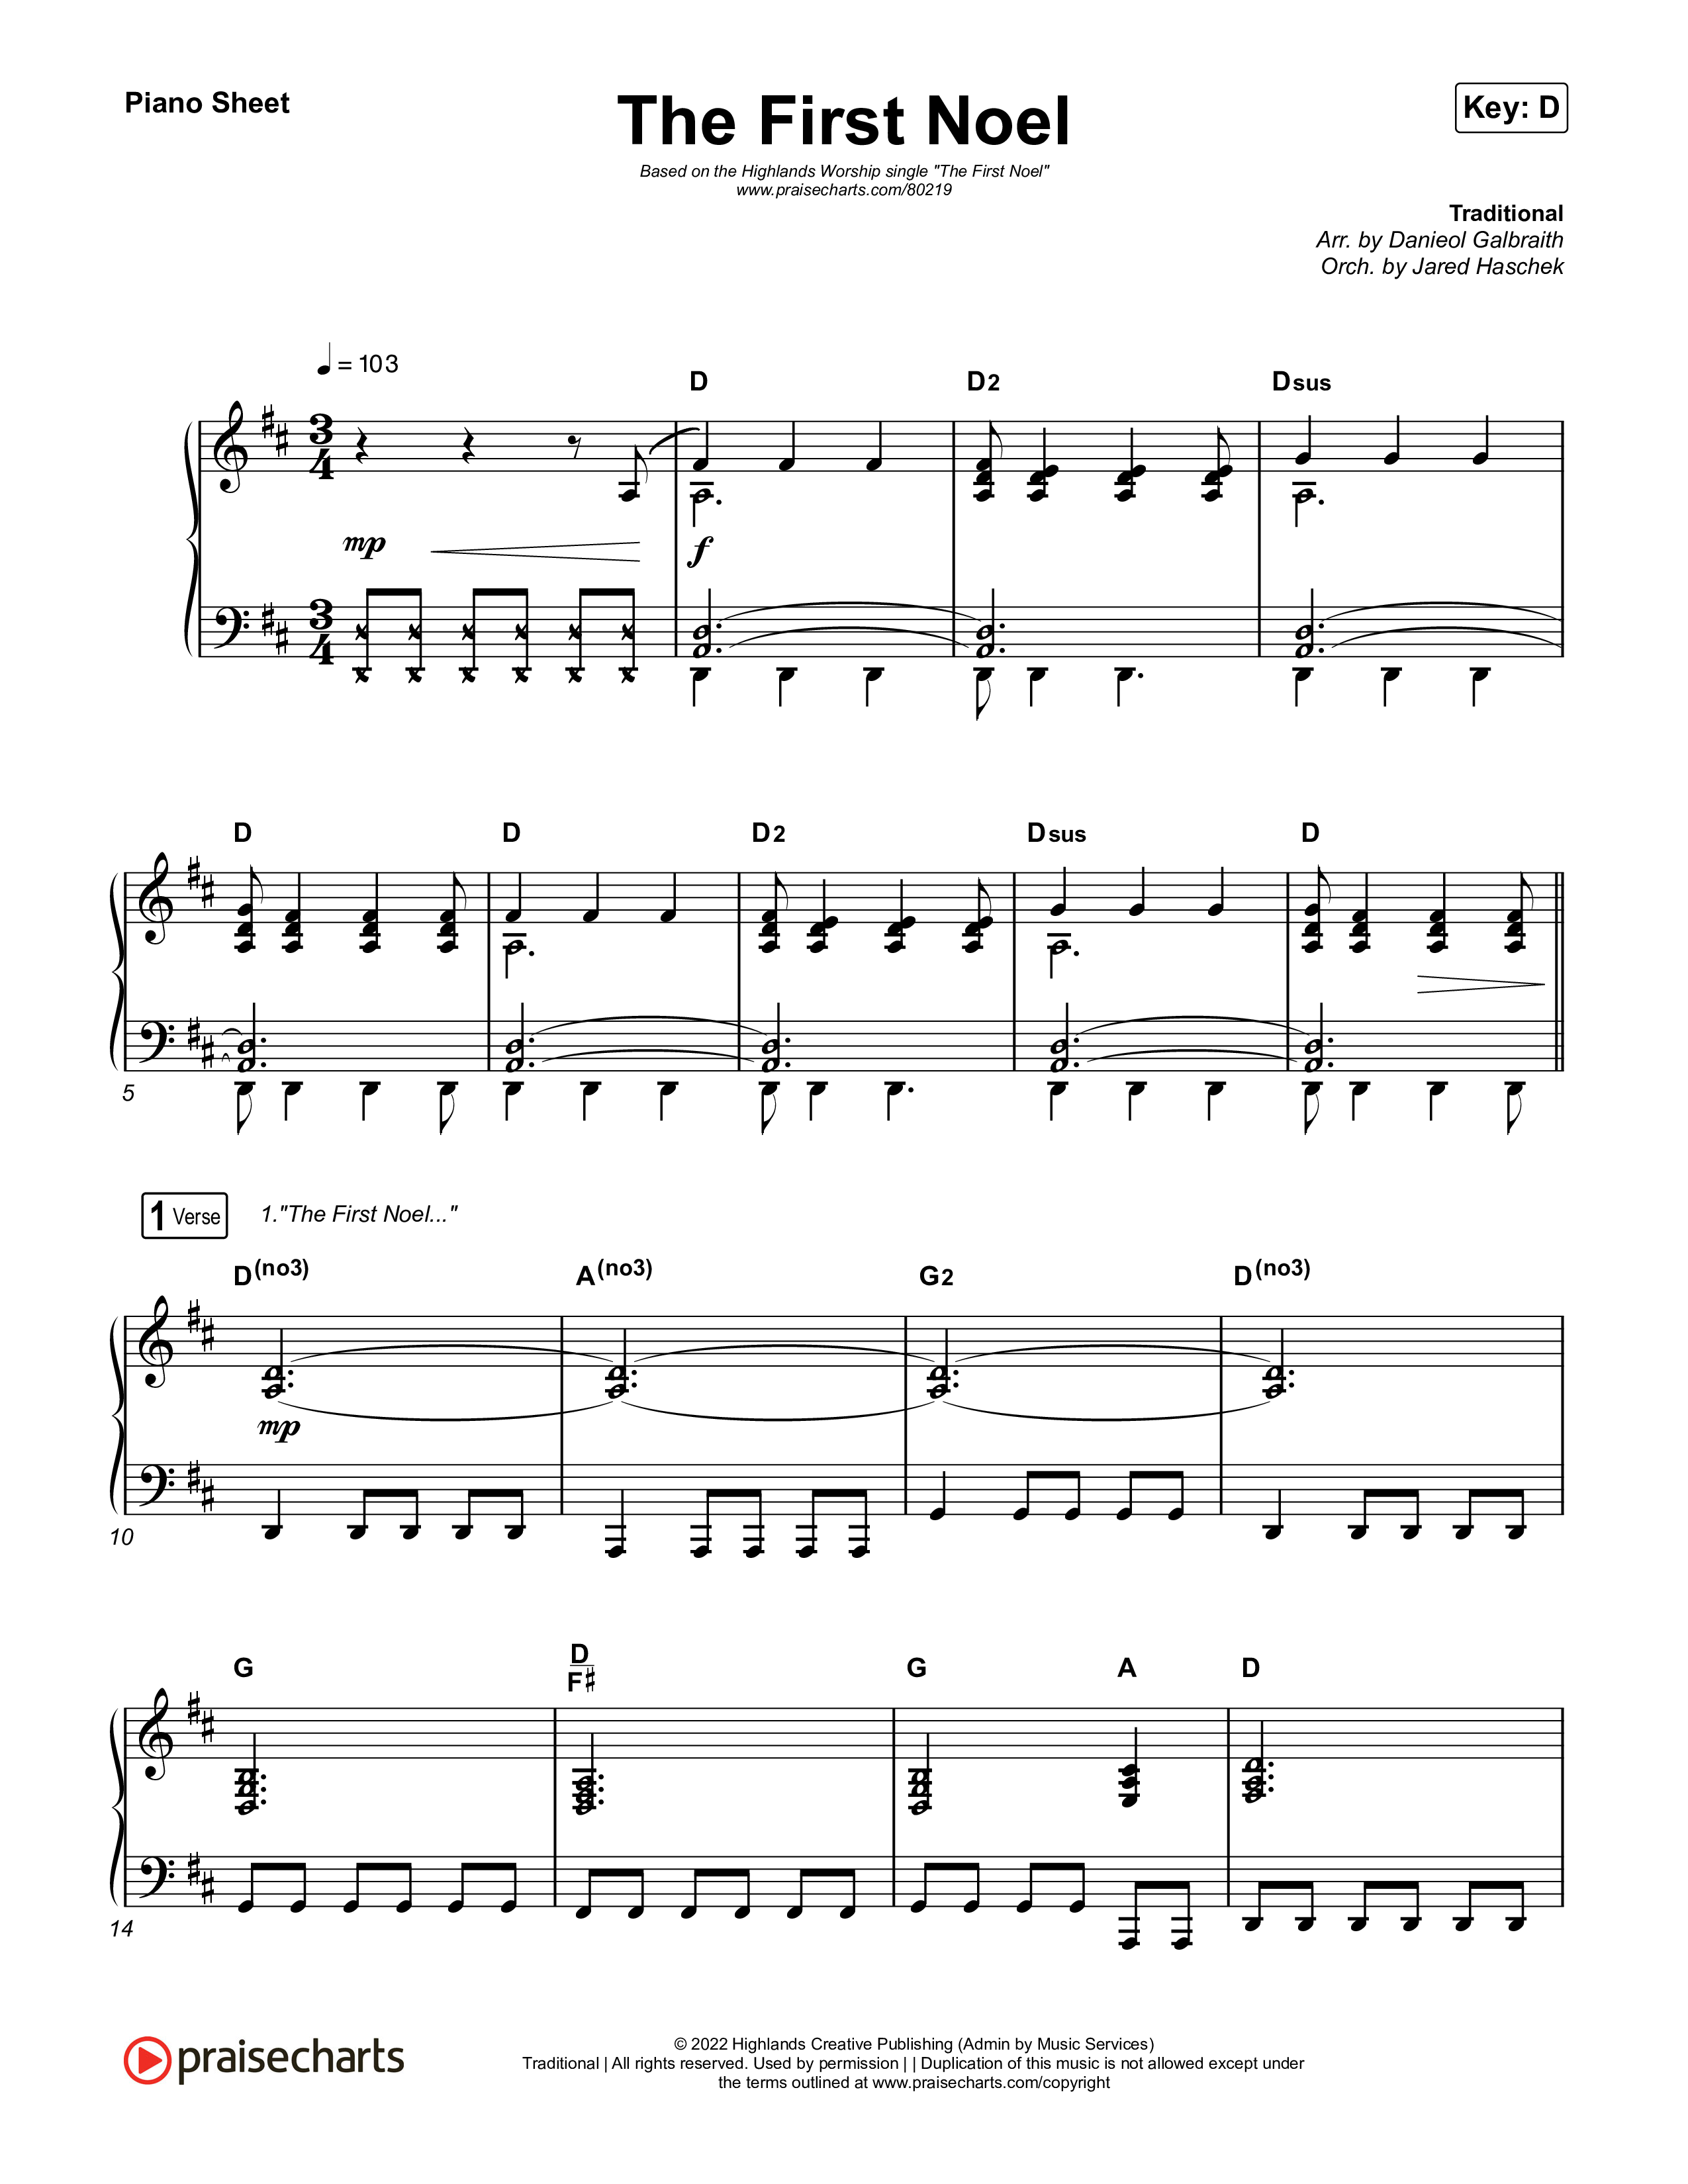 The First Noel Piano Sheet (Highlands Worship)